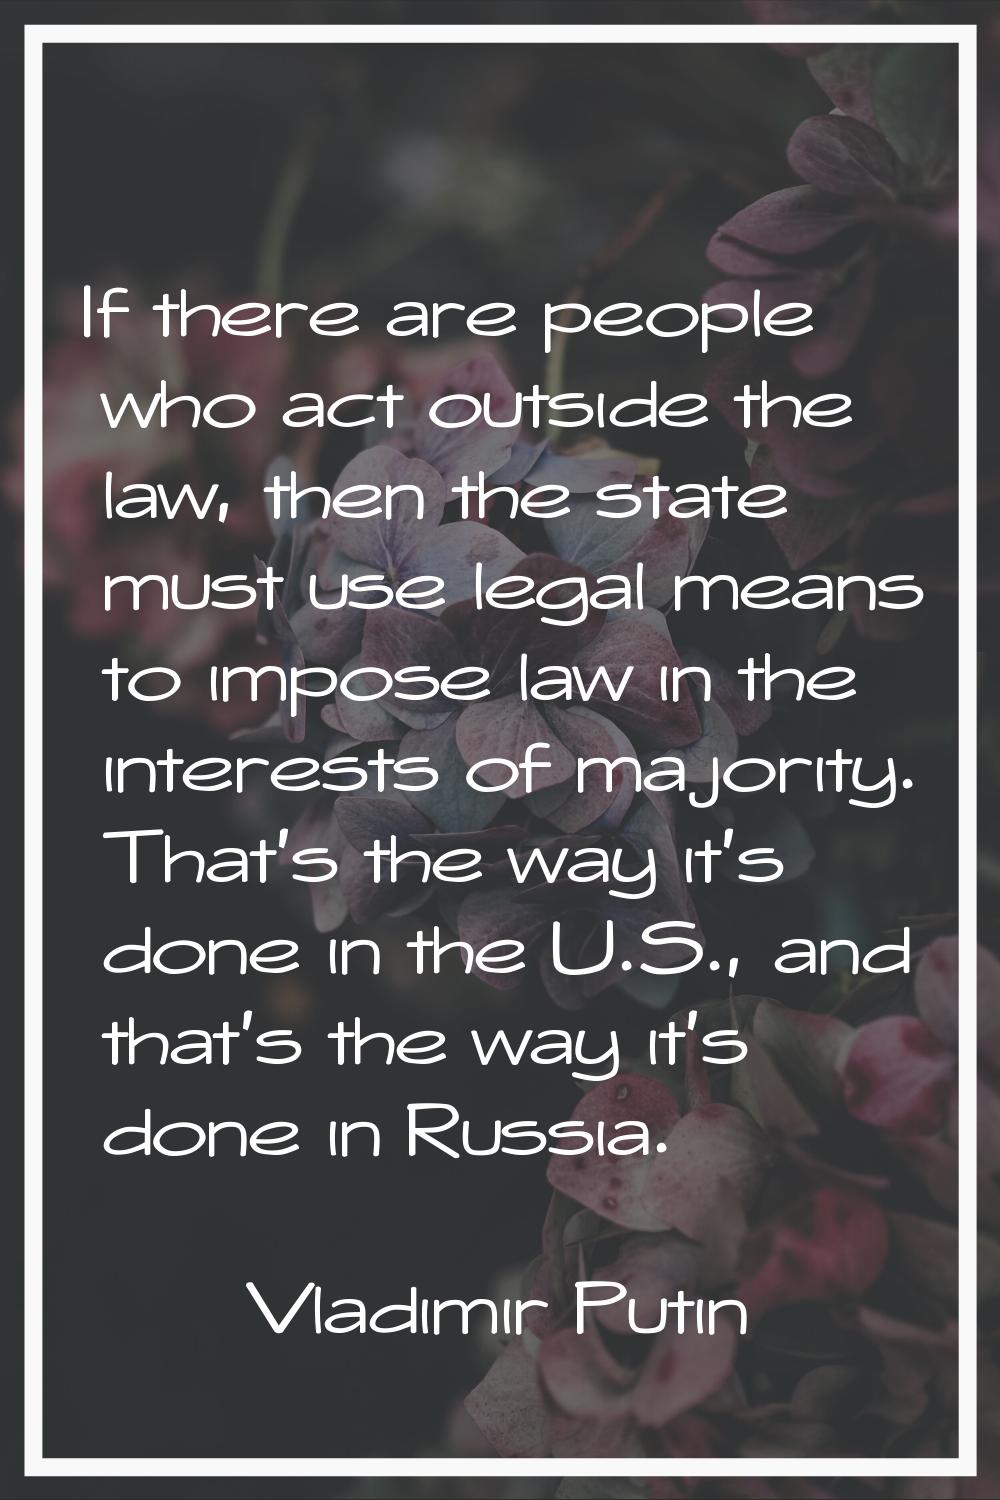 If there are people who act outside the law, then the state must use legal means to impose law in t